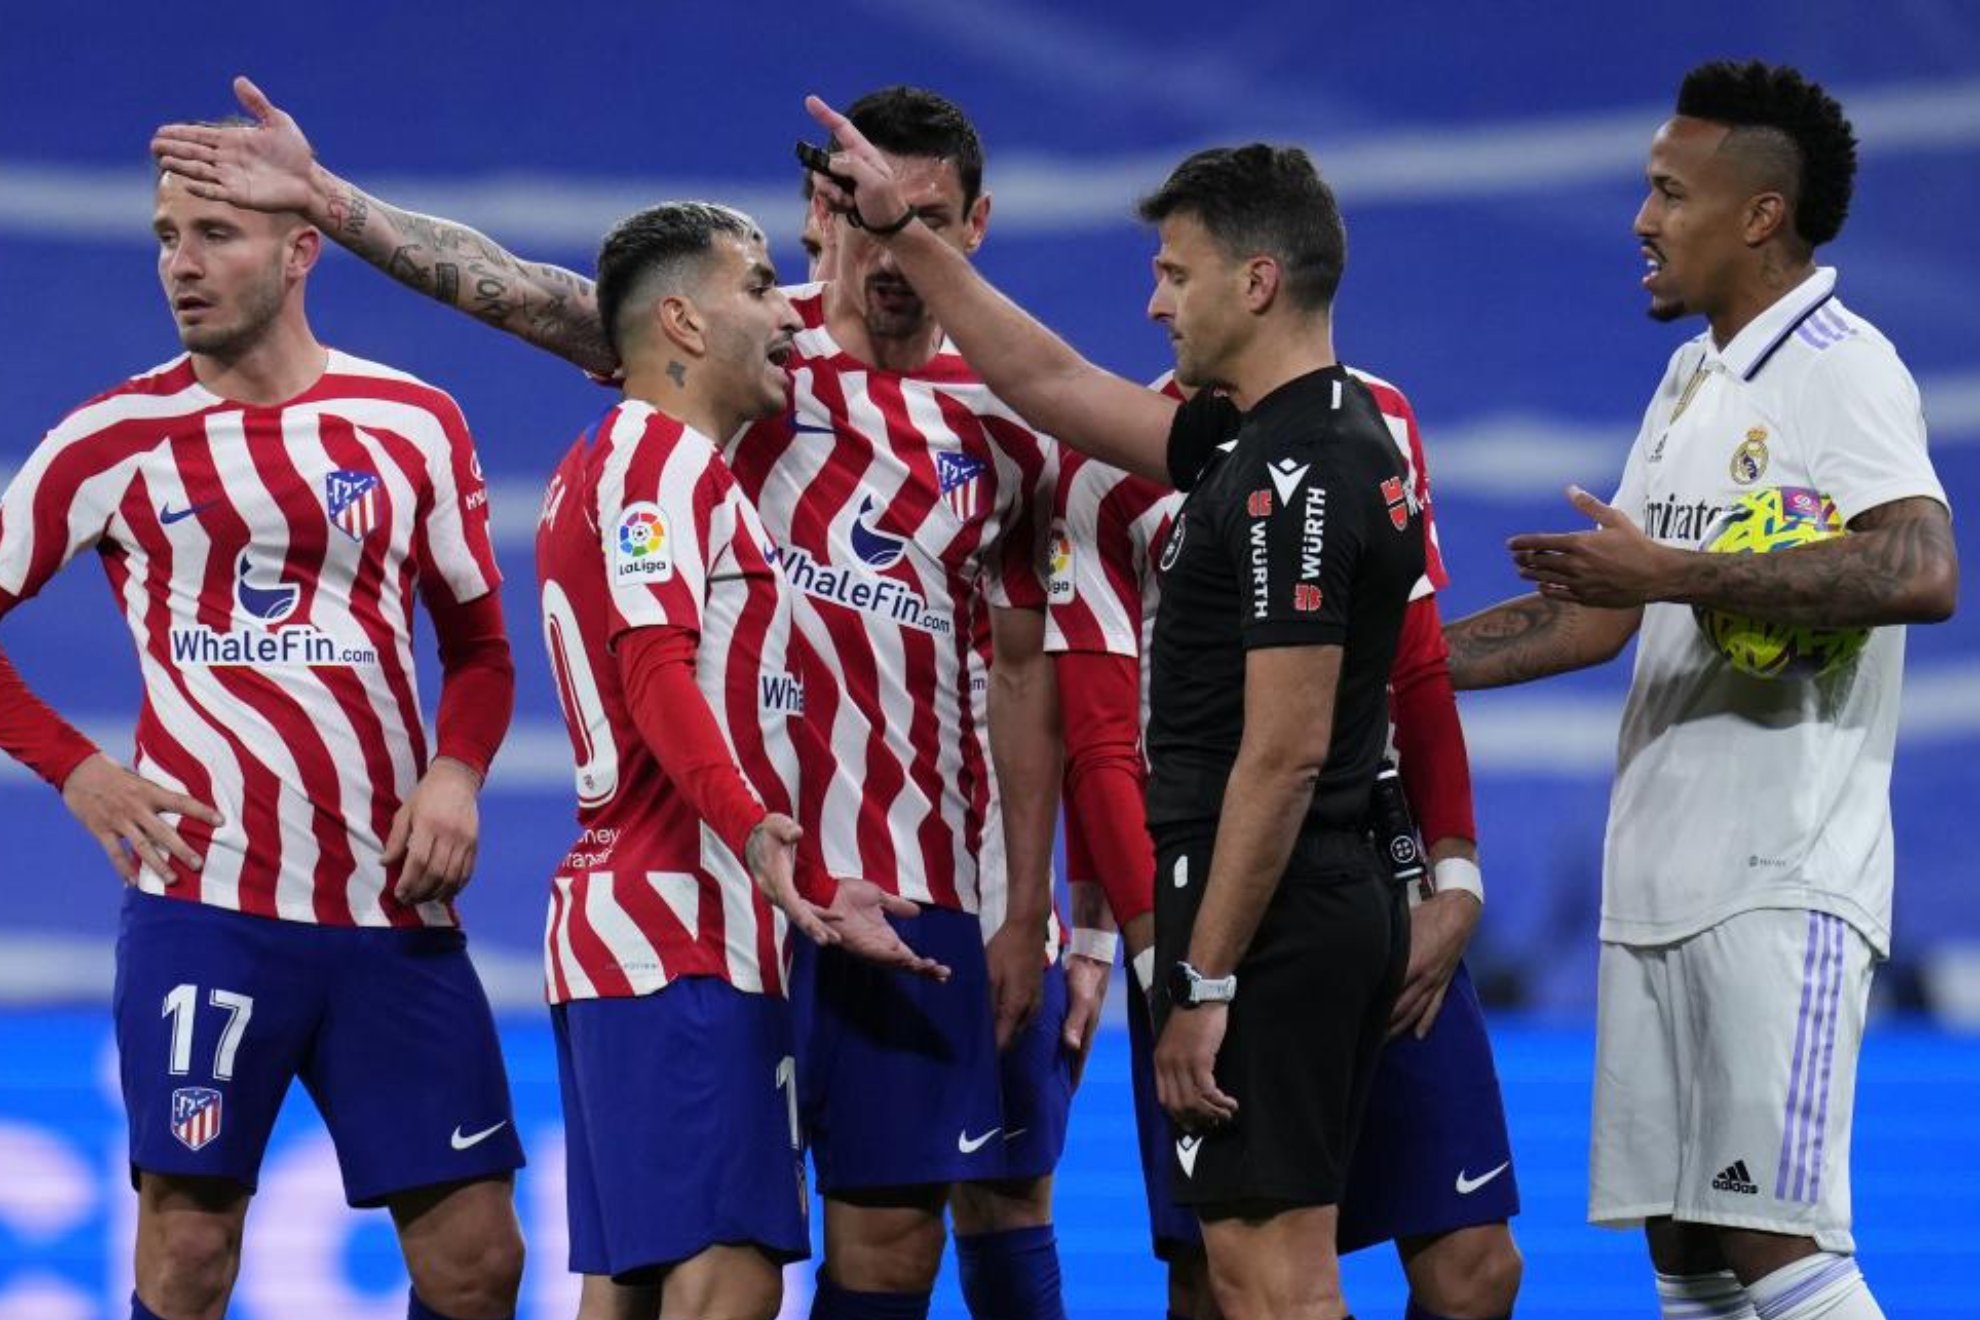 Atletico explodes against Real Madrid after Correa's dismissal: Nothing new at Bernabeu